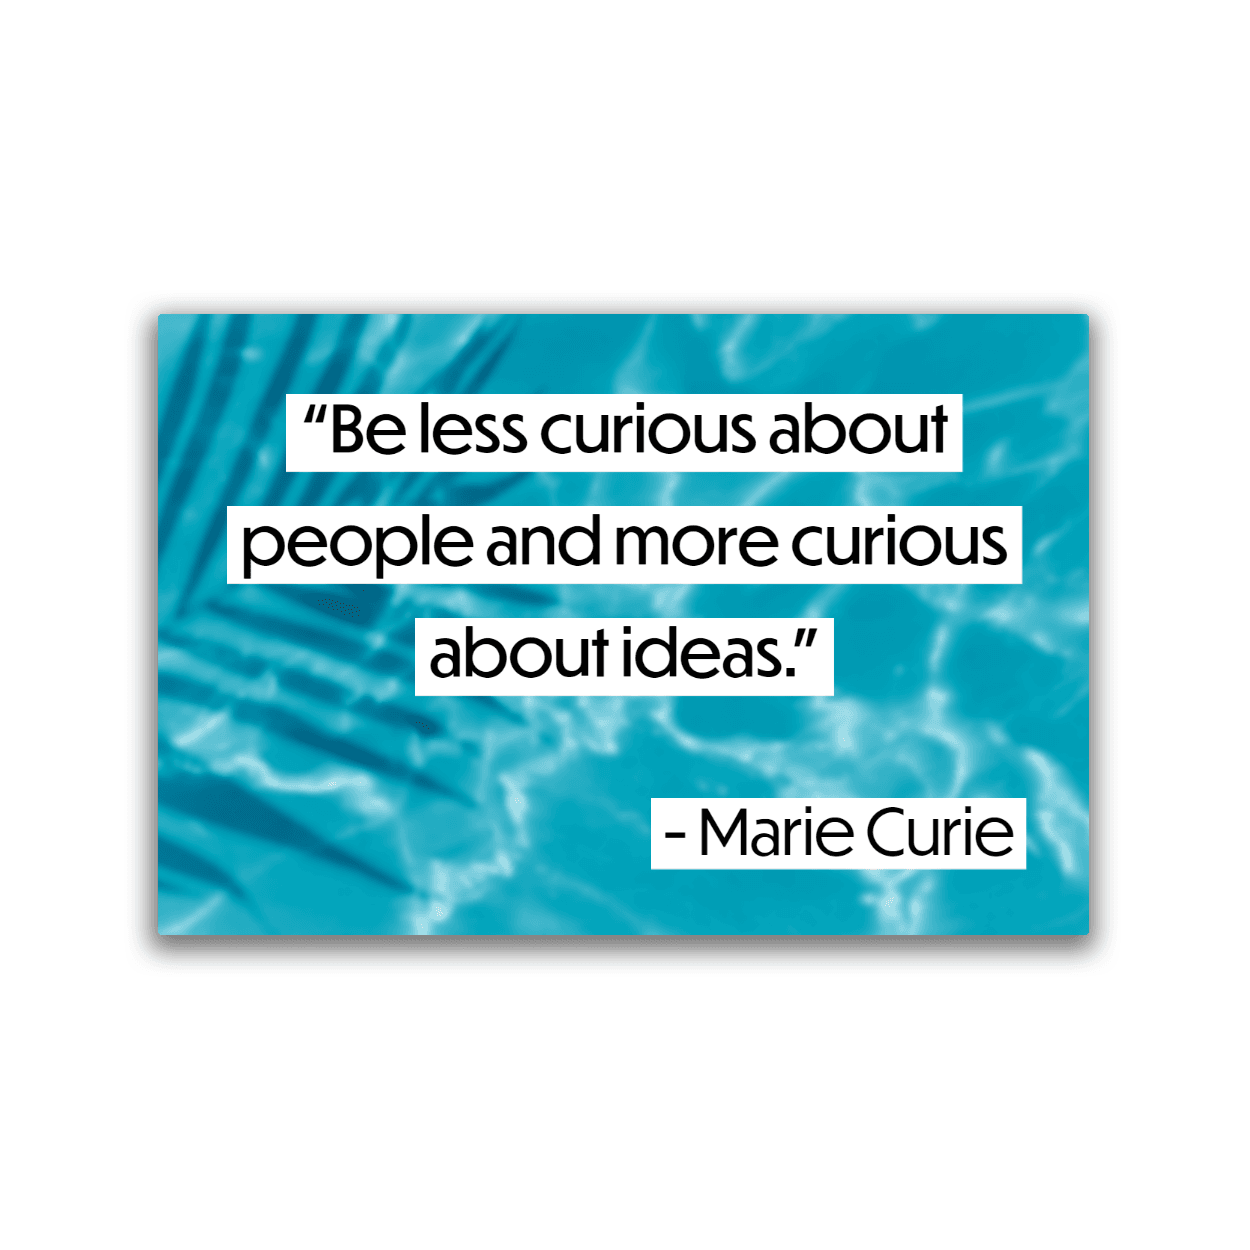 Image of a 2x3 magnet with a Marie Curie quote